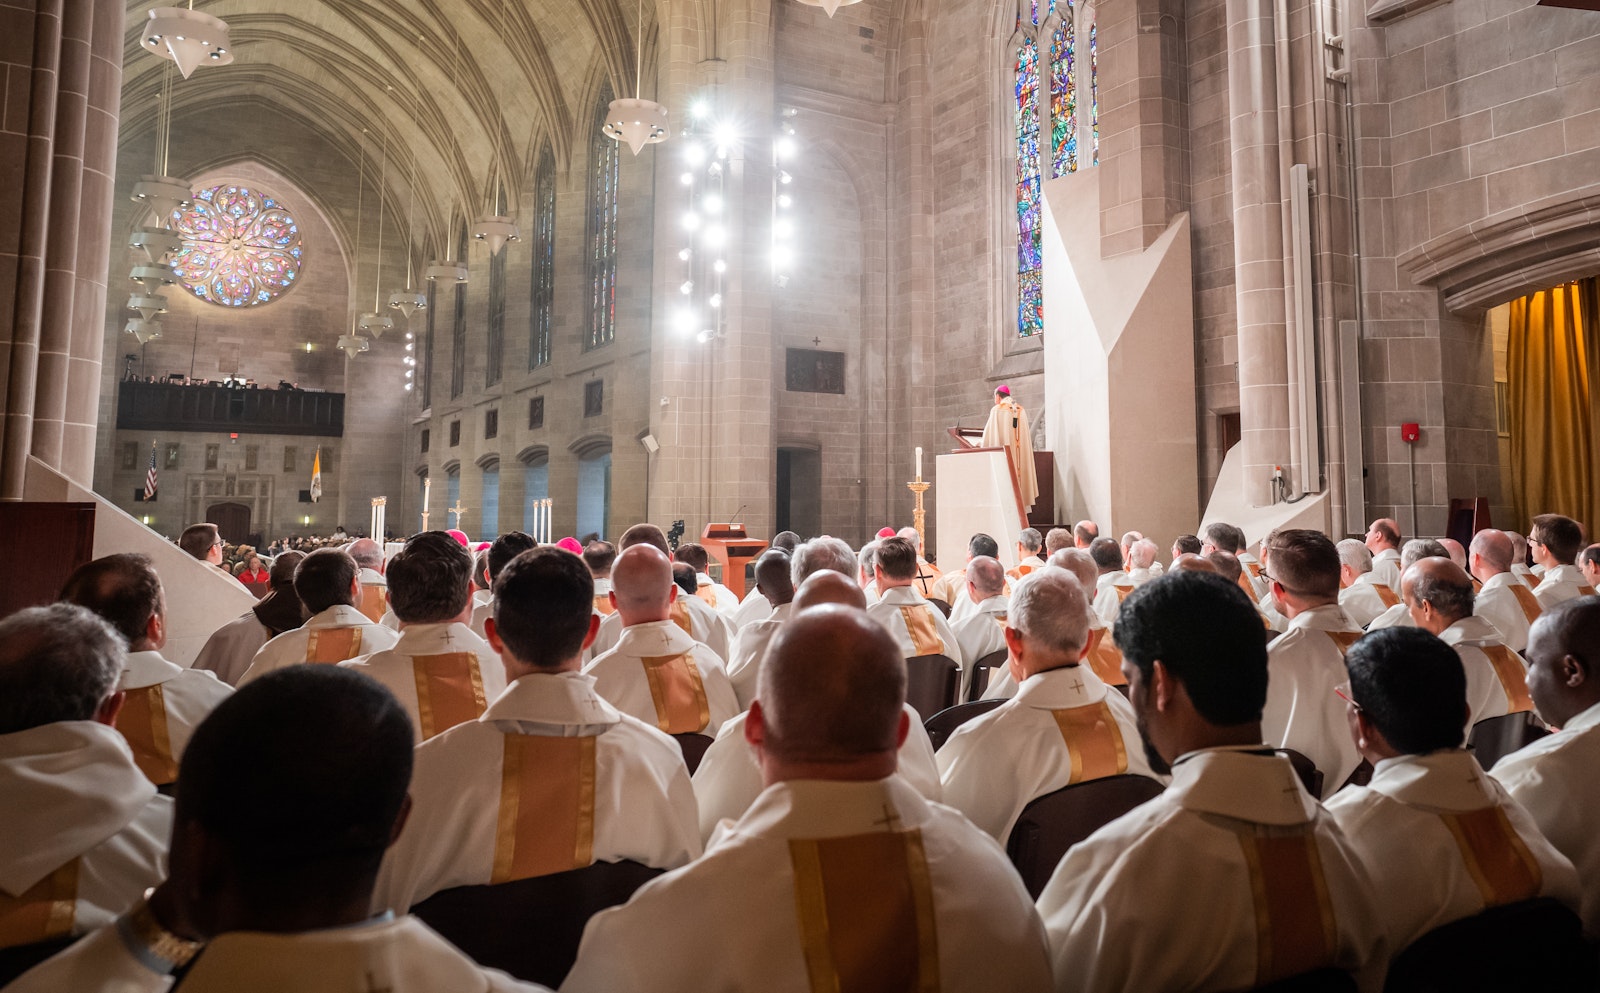 Archbishop Vigneron solemnly noted that soon after the homily, he would call his brother priests to renew the acceptance of their ordination consecration — an ask he knows comes with great sacrifice and self-offering.